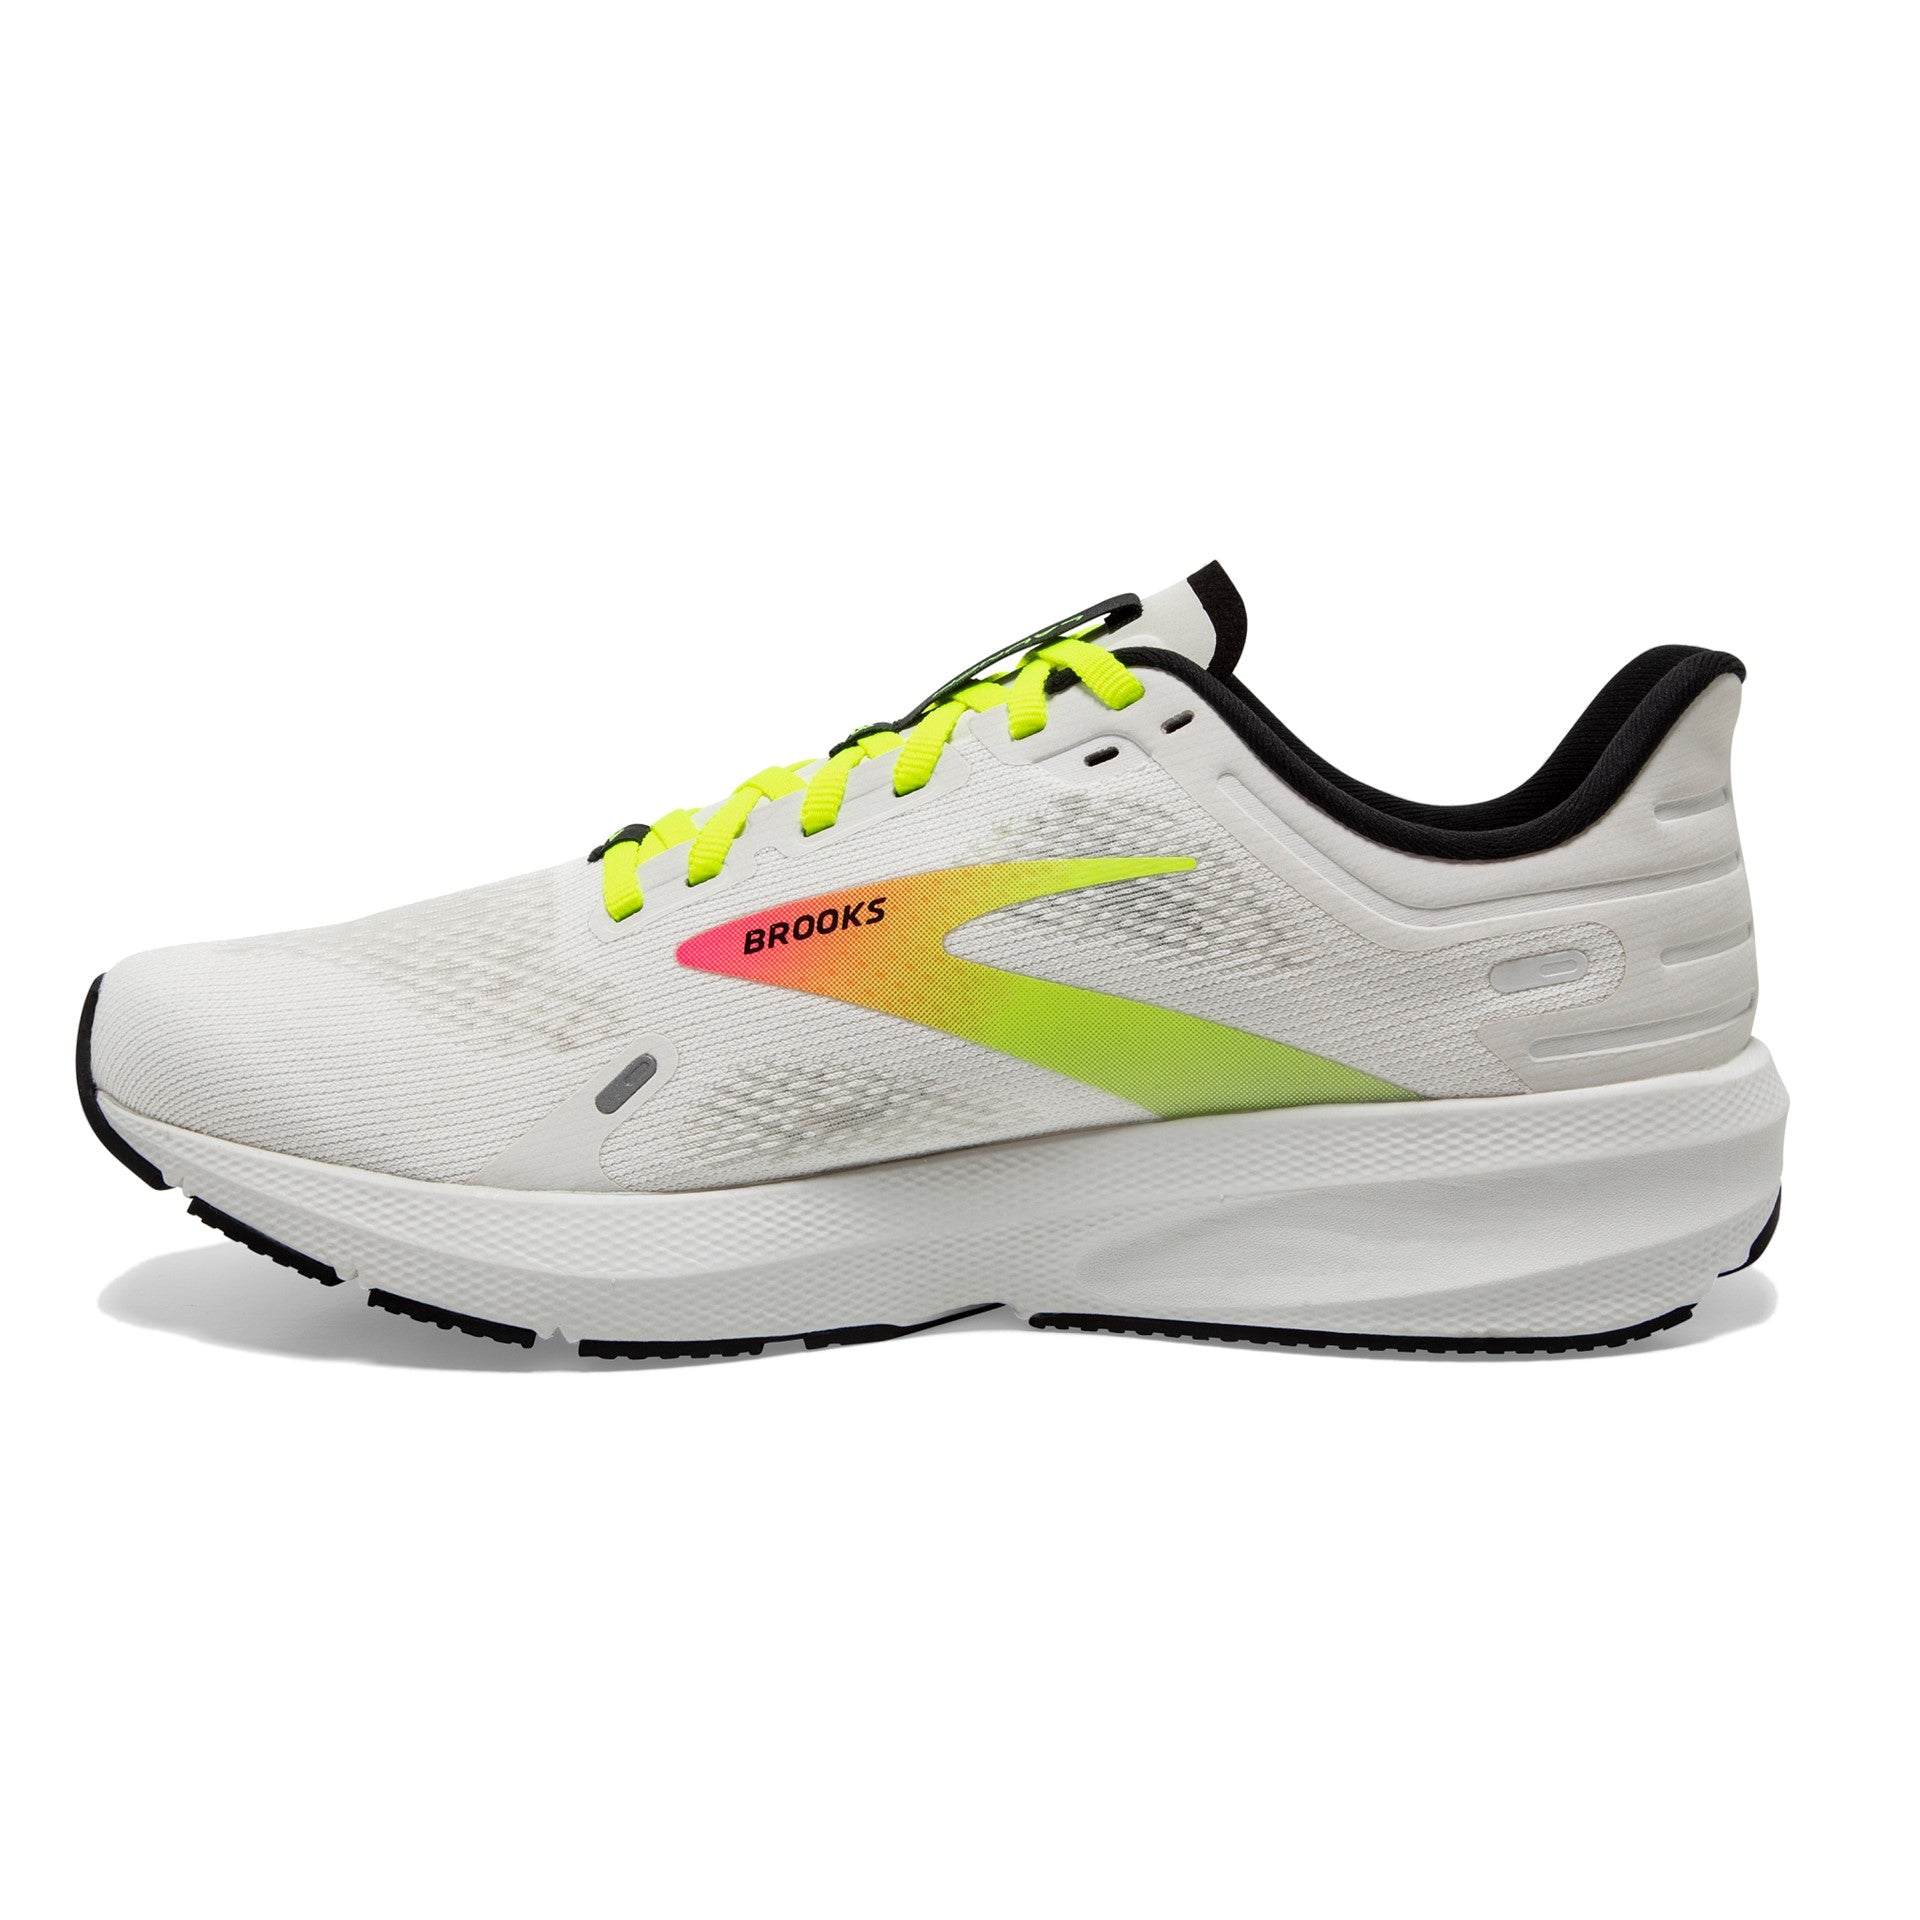 mens launch gts 9 148 WHITE/PINK/NIGHTLIFE